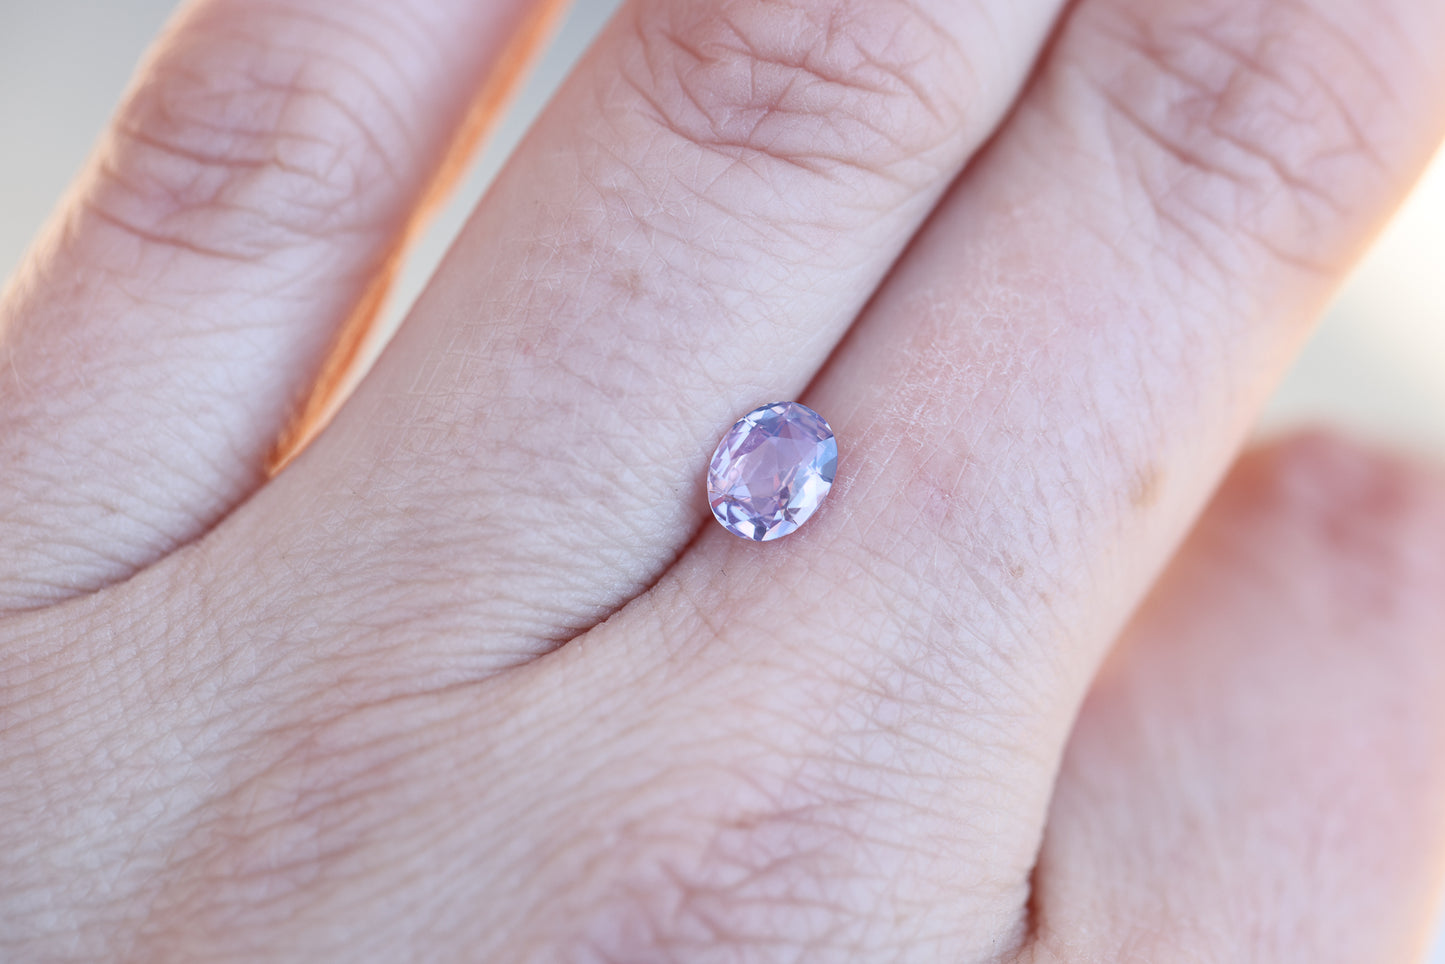 1.06ct oval opalescent lavender pink sapphire